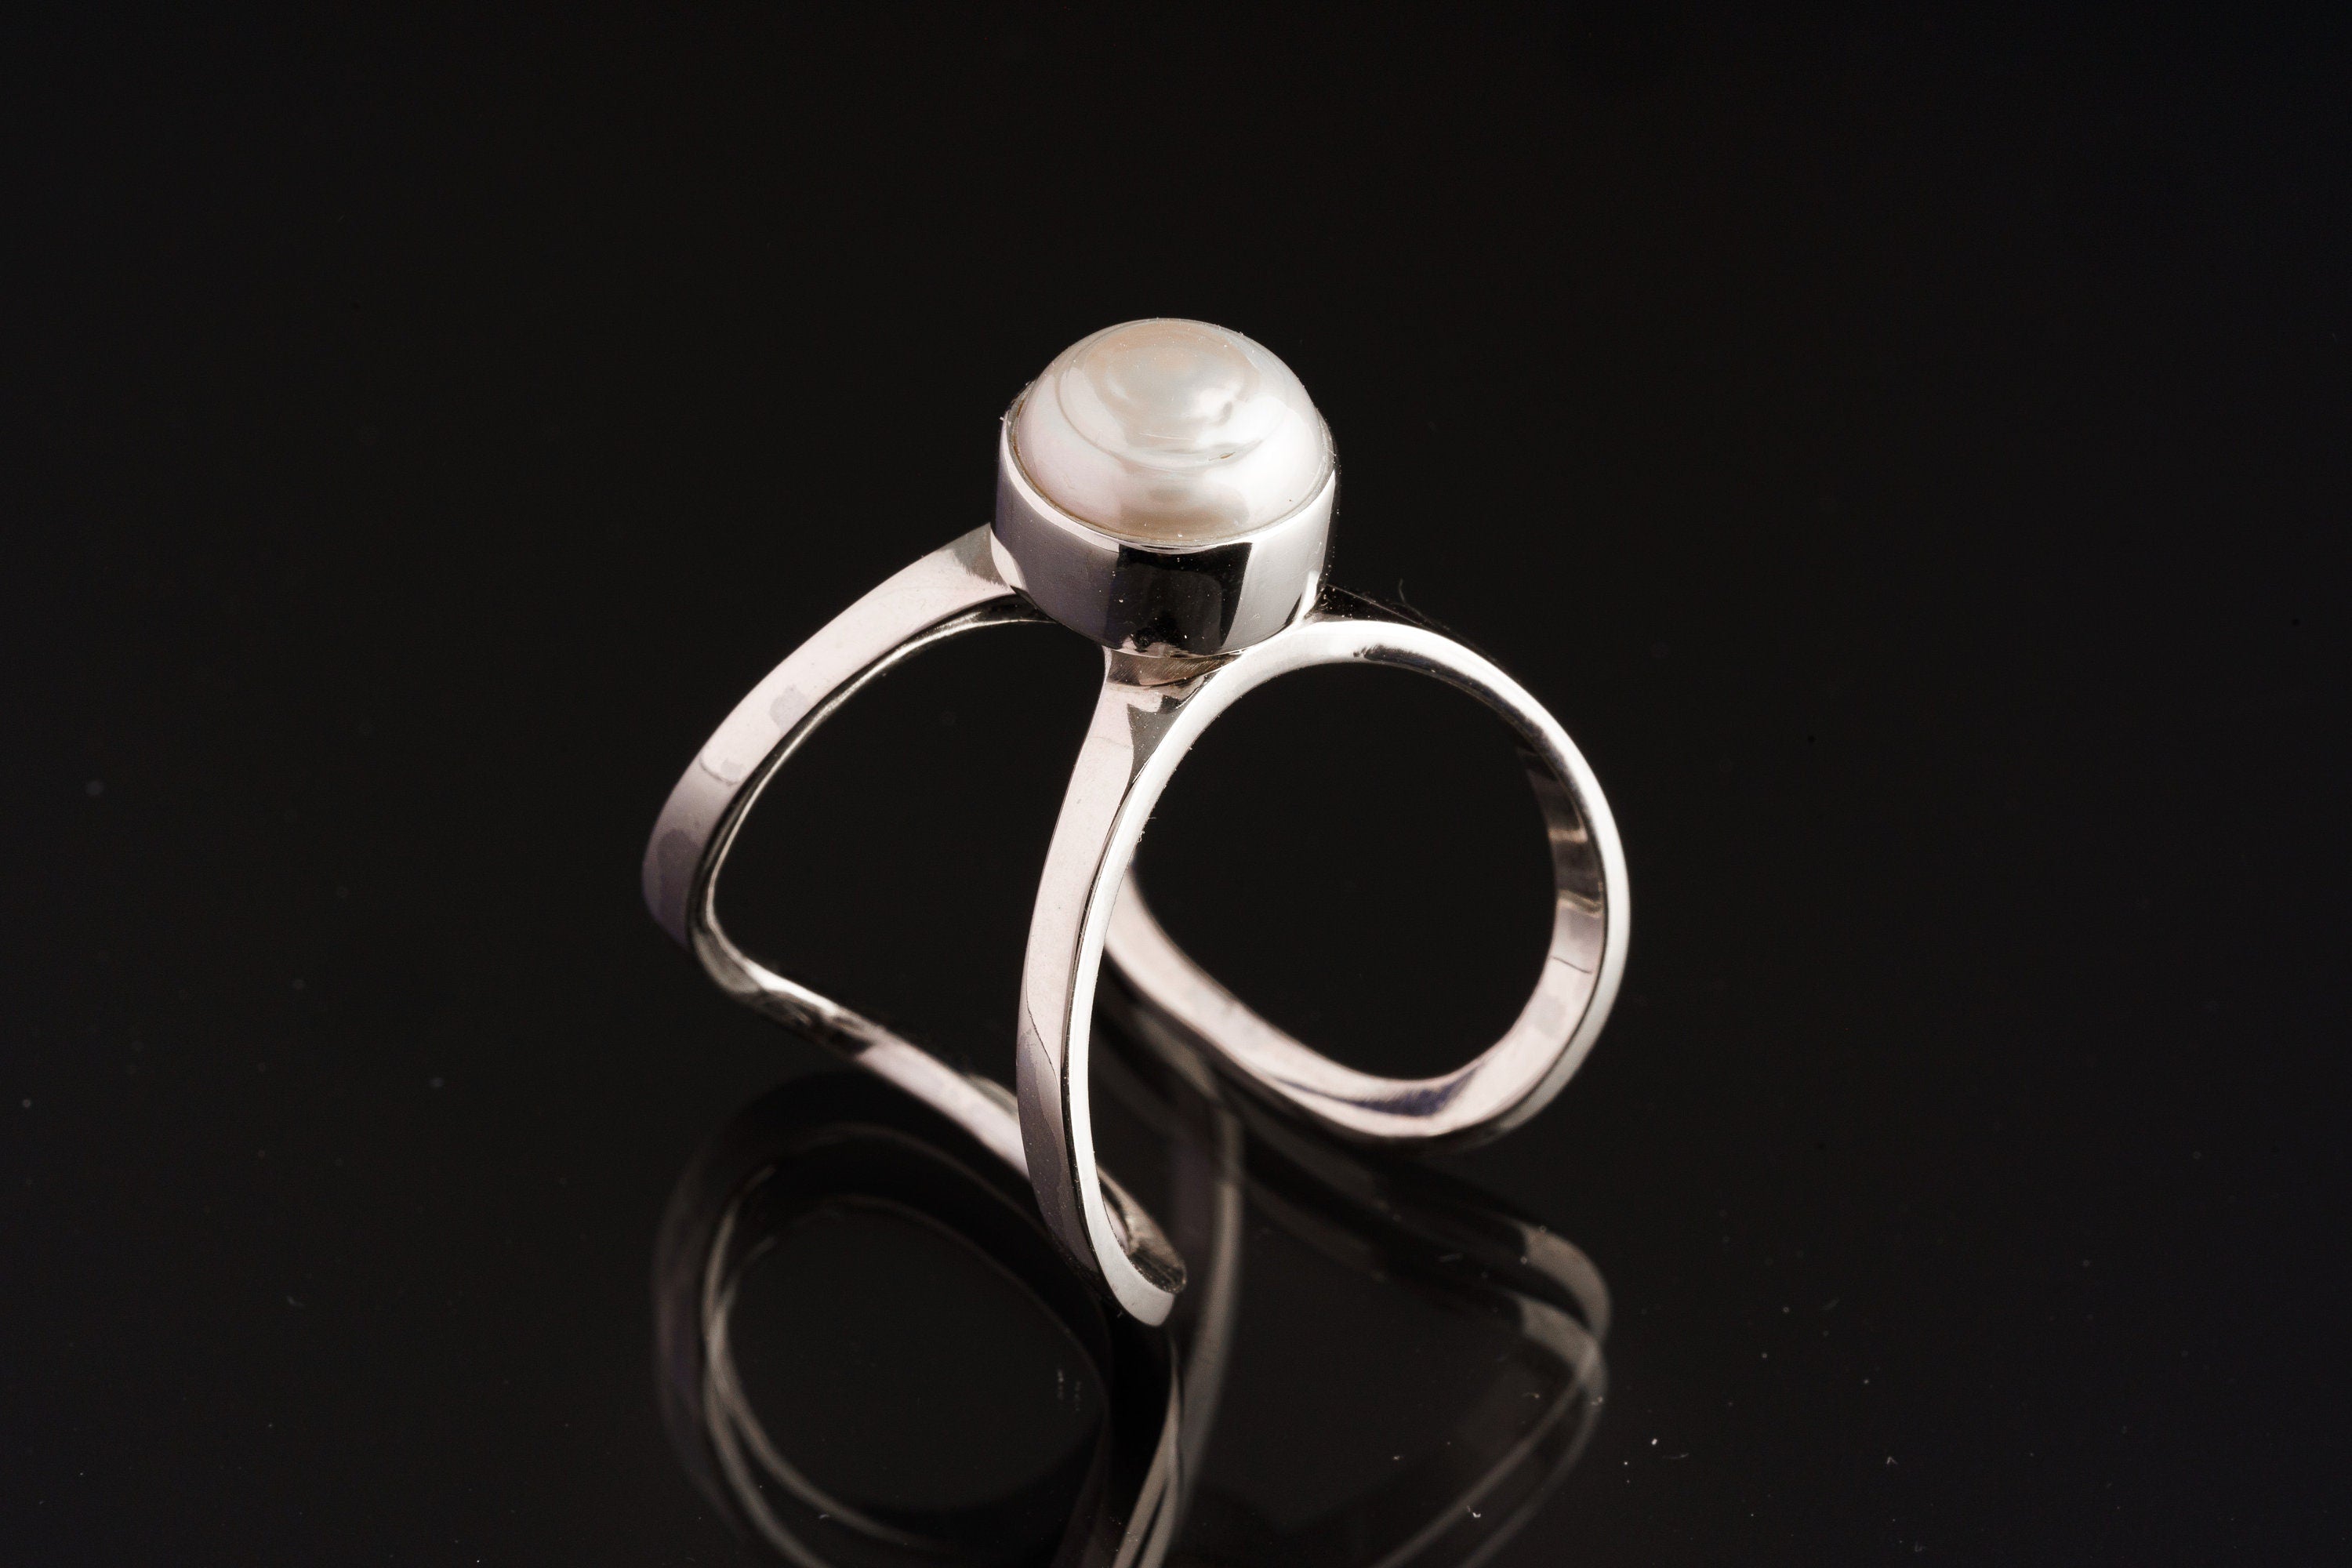 Big Round South Sea Pearl - 925 Sterling Silver - Butterfly Adjustable Cast Ring - Polished finish - Size 5-9 US